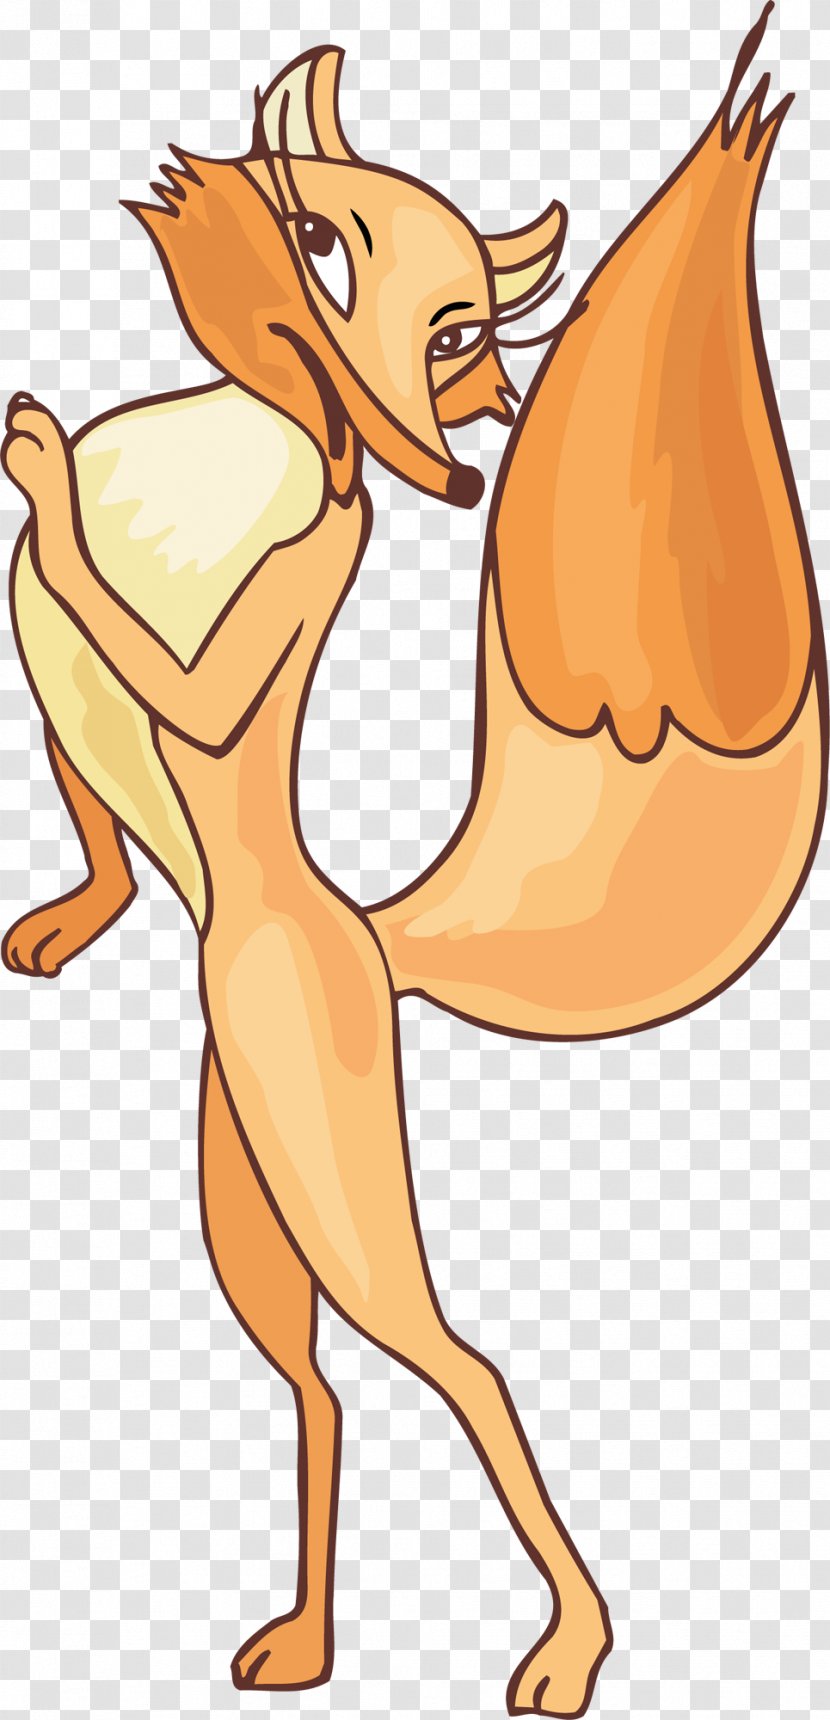 Red Fox Lion Hare Transparent PNG